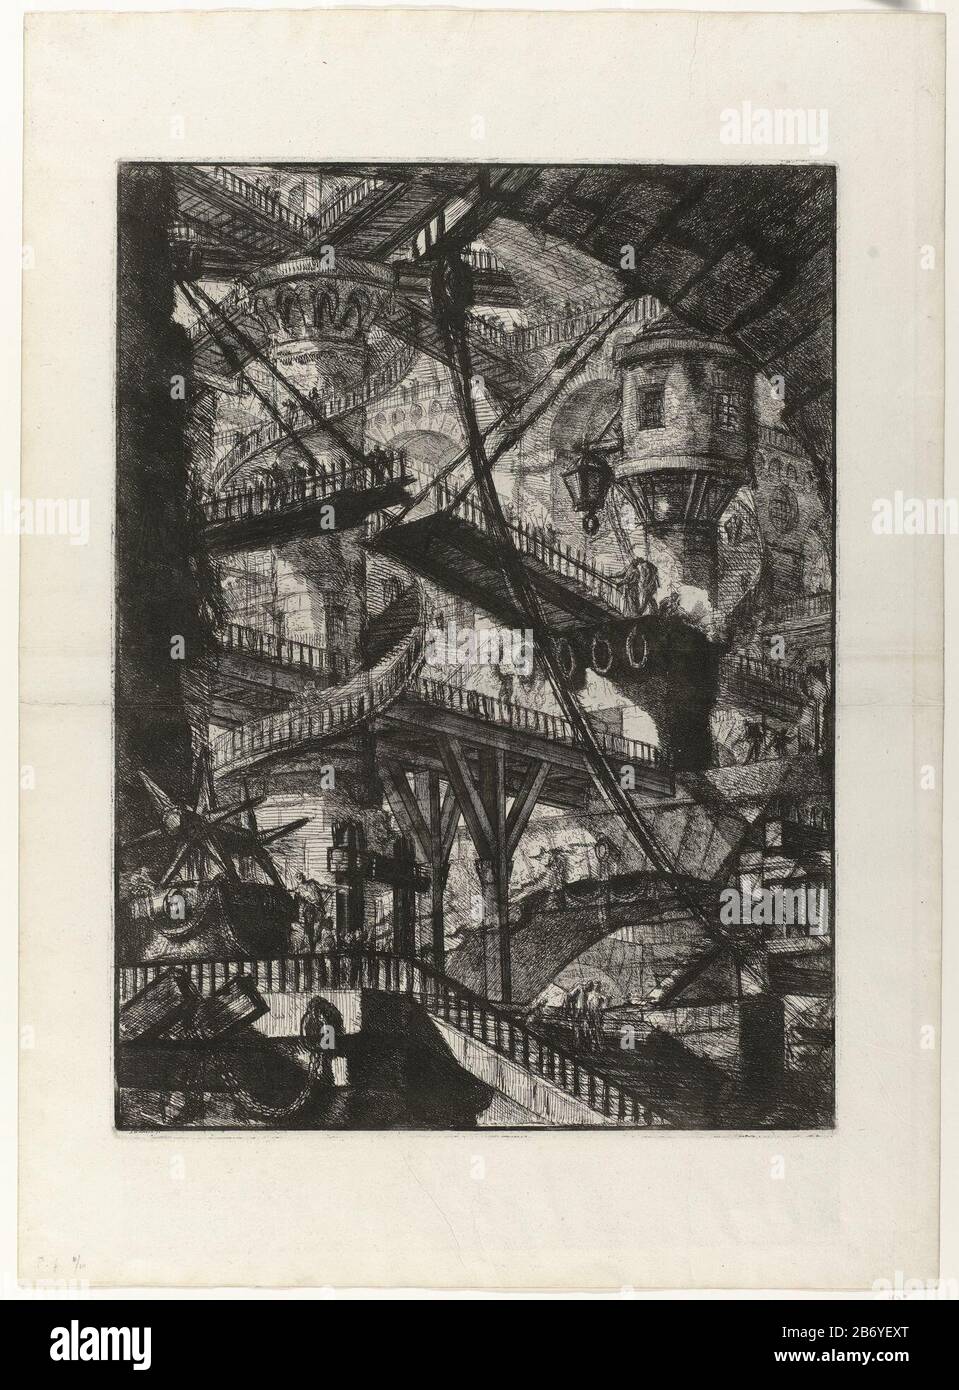 Kerker met ophaalbrug Kerkers (serietitel) Carceri d'invenzione (serietitel) Face in a monumental space a dungeon, with a drawbridge and a large wenteltrap. Manufacturer : printmaker Giovanni Battista Piranesi (listed building) in its design: Giovanni Battista Piranesiuitgever: Giovanni Battista PiranesiPlaats manufacture: Rome Date: 1761 Physical features: etching and engra material: paper Technique: etching / engra (printing process) Measurements: plate edge: h 553 mm × W 412 mmToelichtingDeze print is a part of the second edition of the 'Carceri'-series by Giovanni Battista Piranesi. The 14 Stock Photo